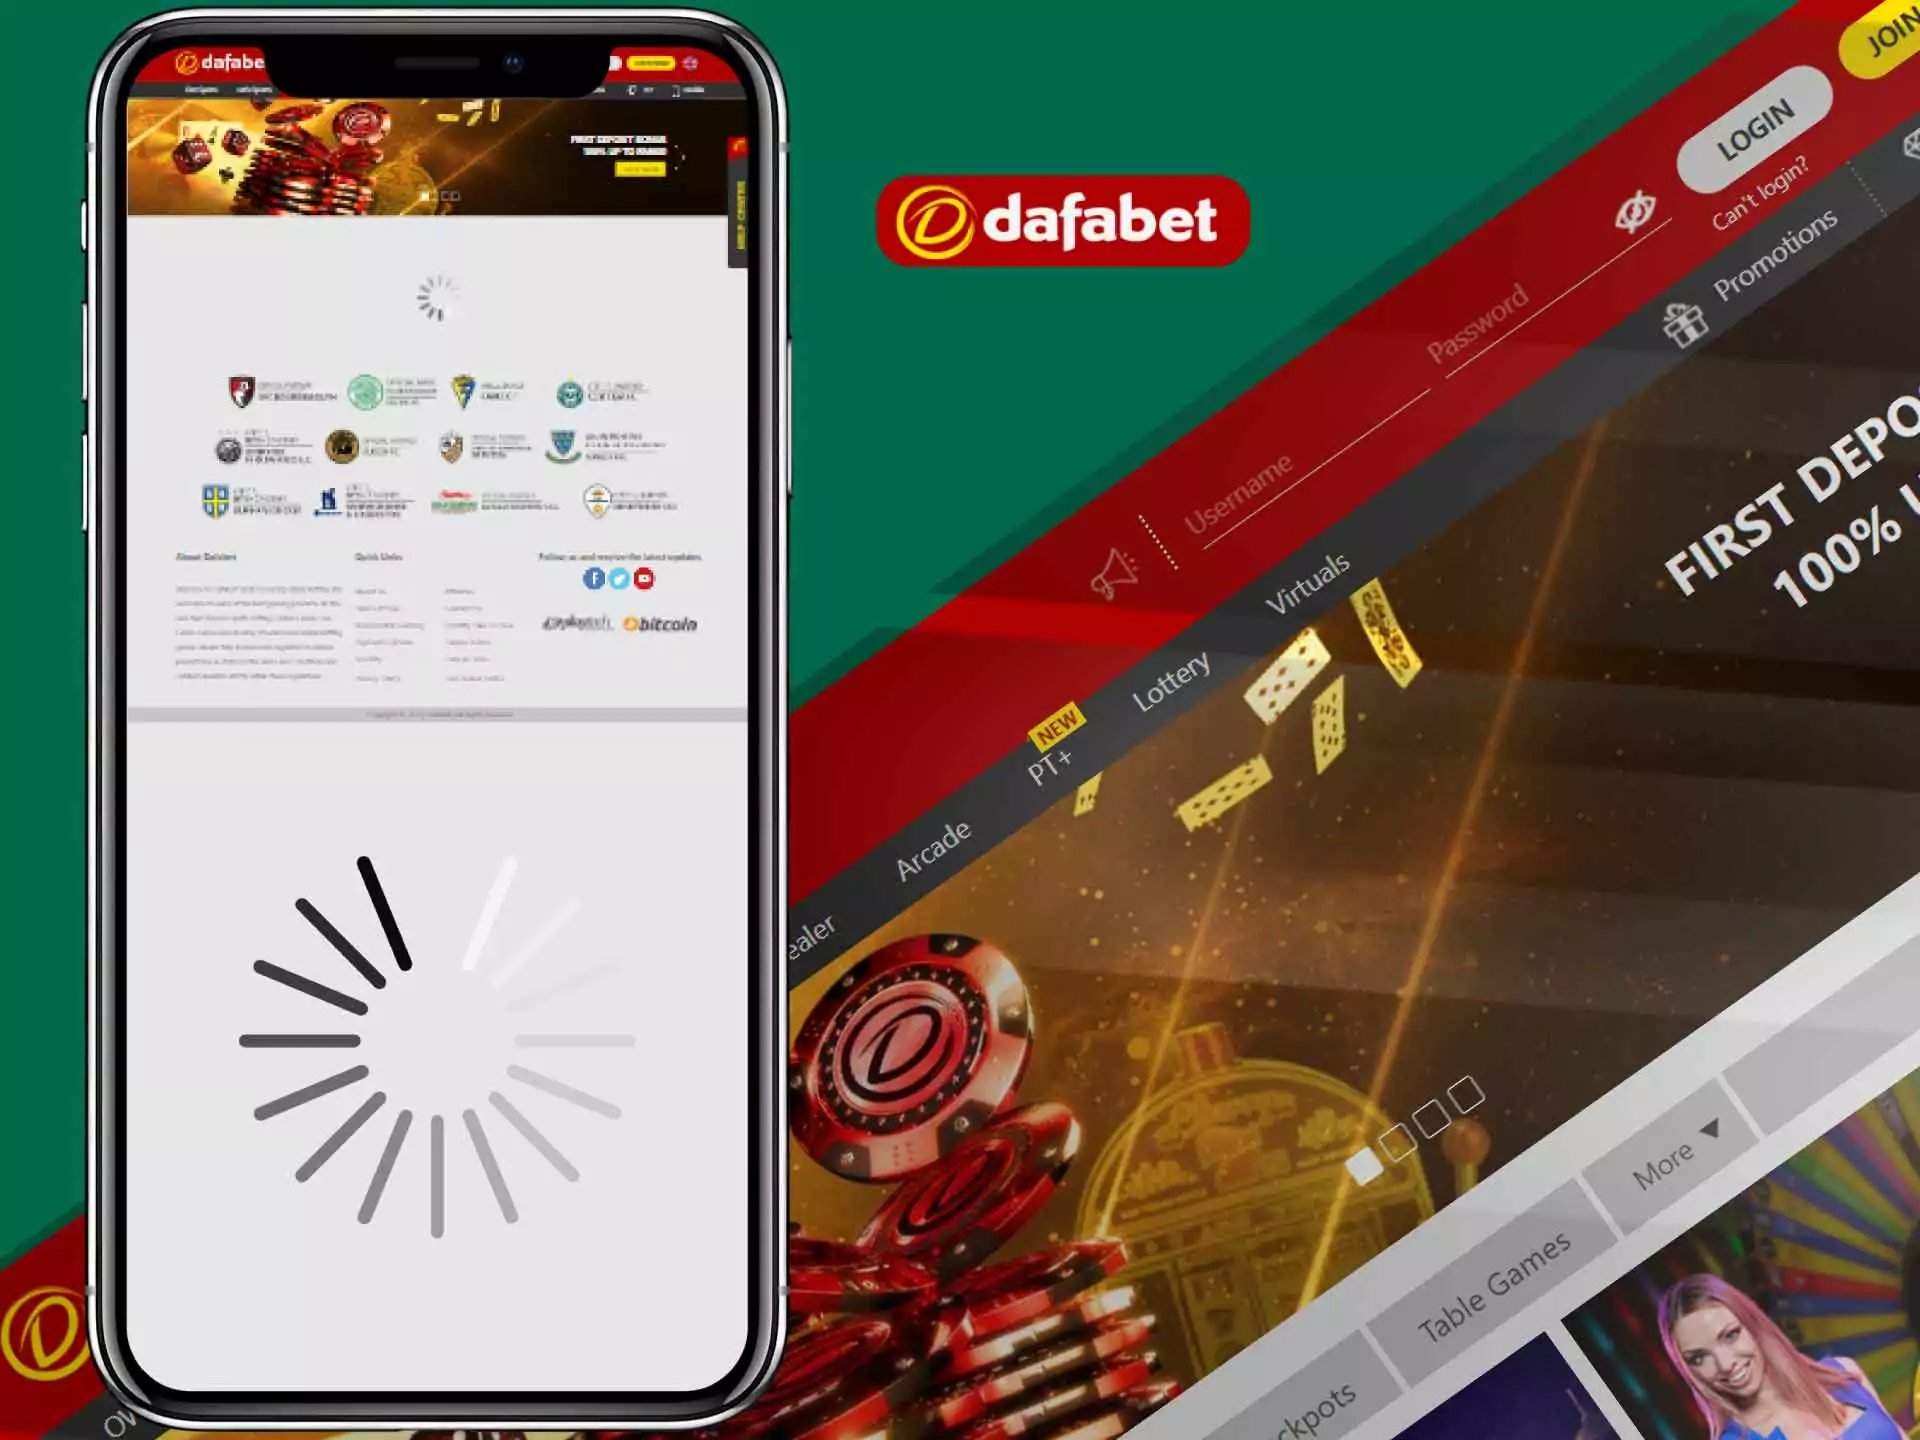 The Dafabet mobile app updates automatically.